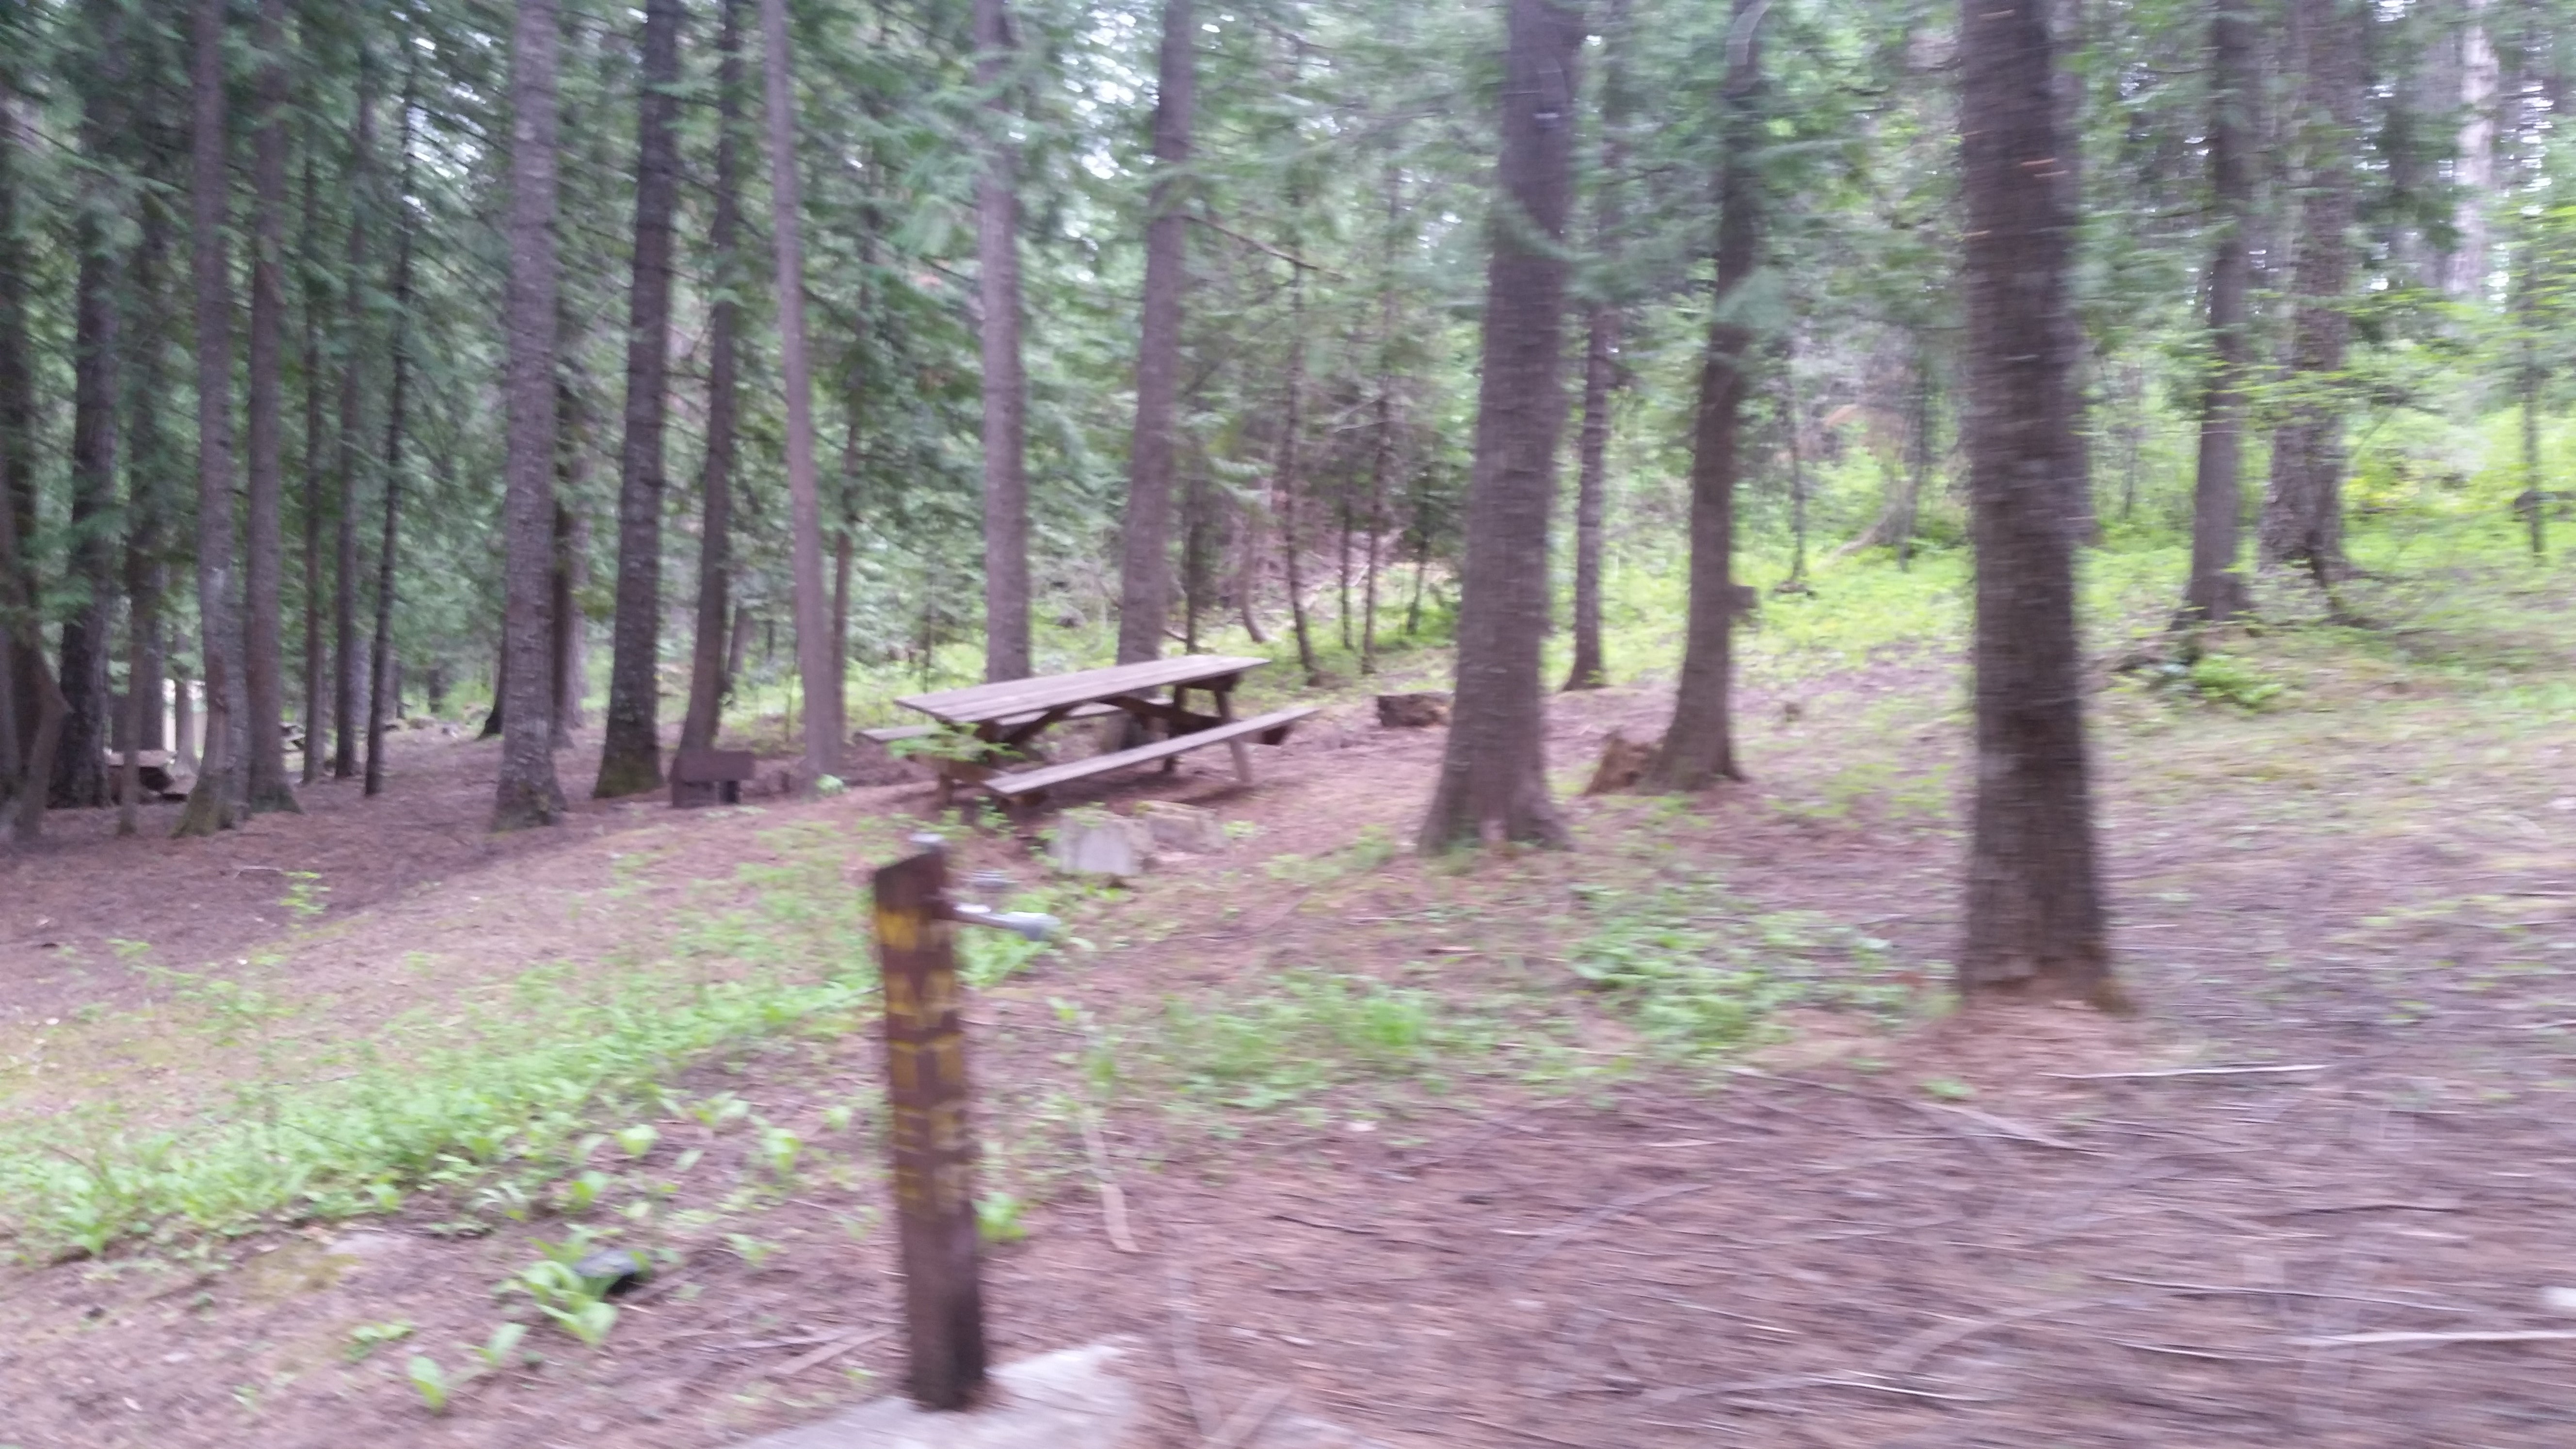 Camper submitted image from Pend Oreille County Park - 2